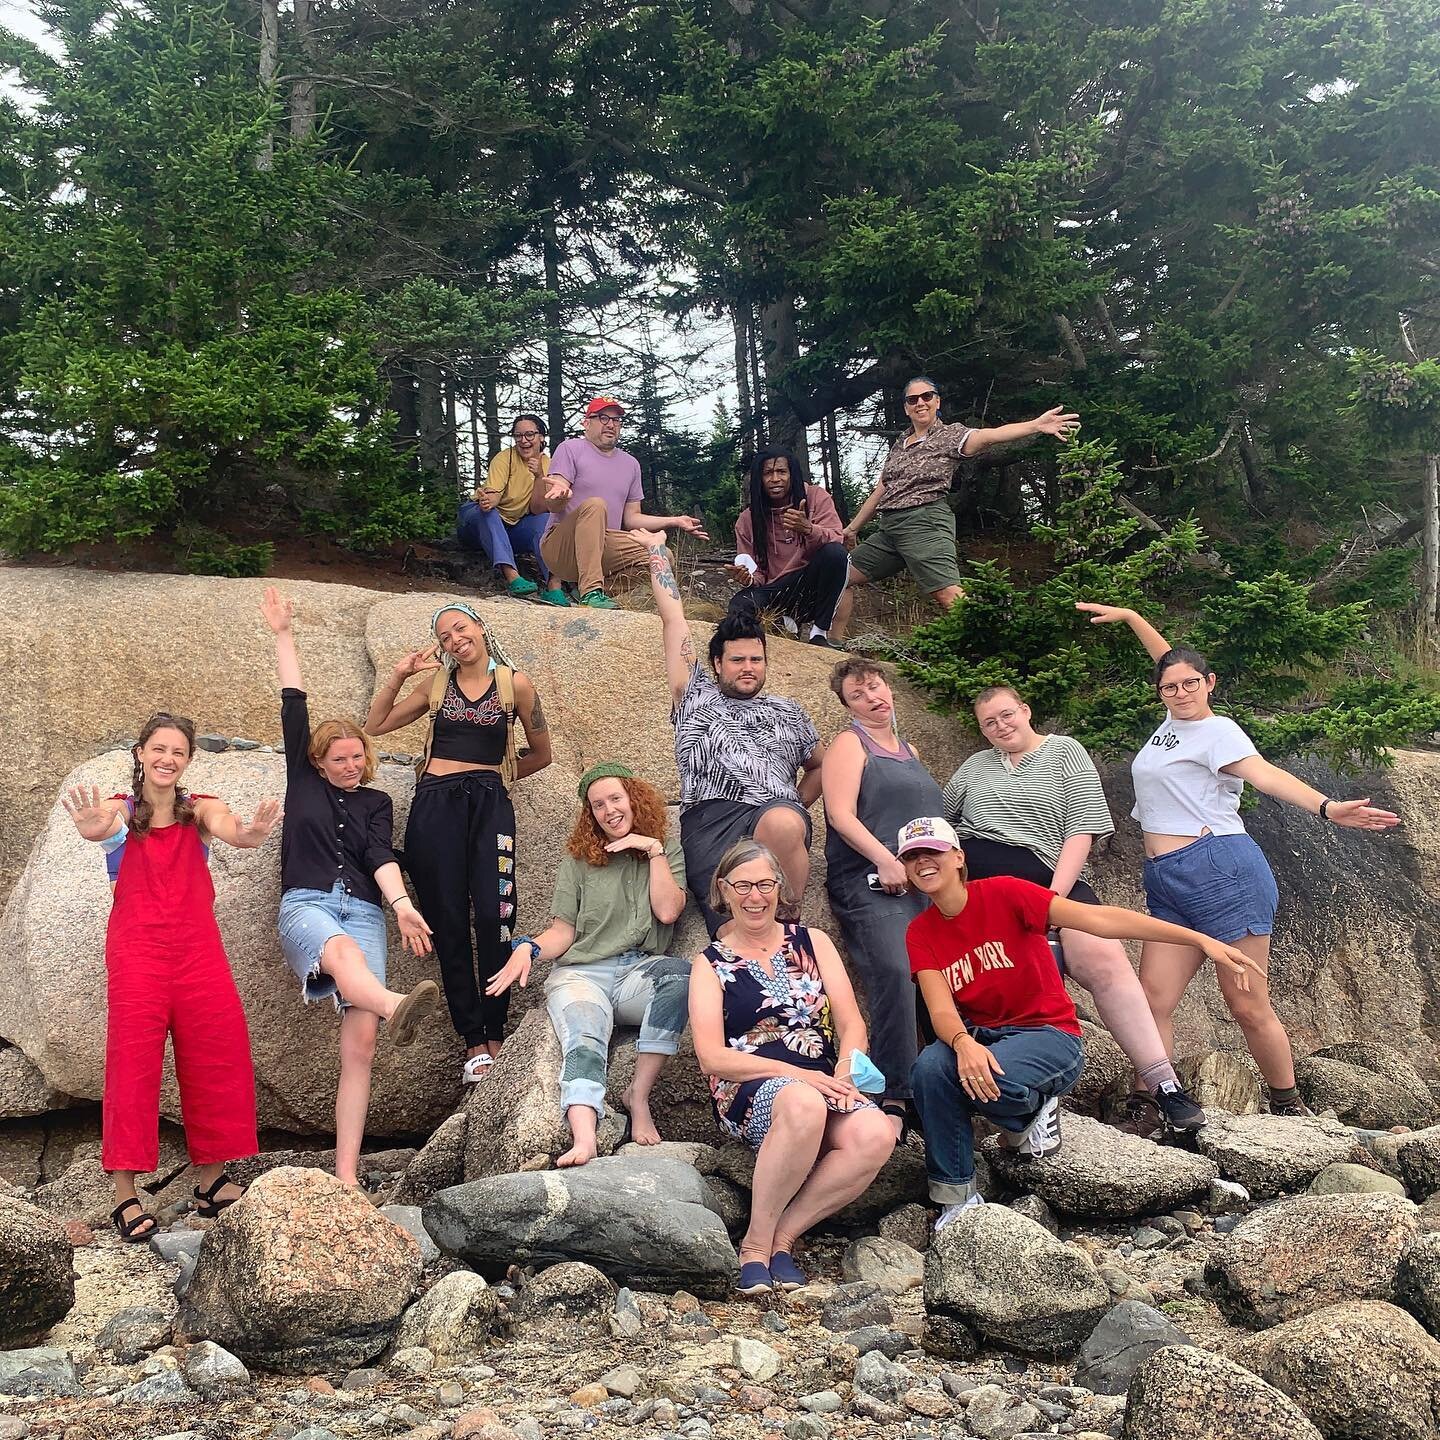 Cheers to the fantastic fibers family we made all together at Haystack! I miss you all already so dearly (deer isle &mdash; ly?) here&rsquo;s to spinning yarn on the ultimate drop spindle and stringing it up in the woods like the goldenrod crab spide